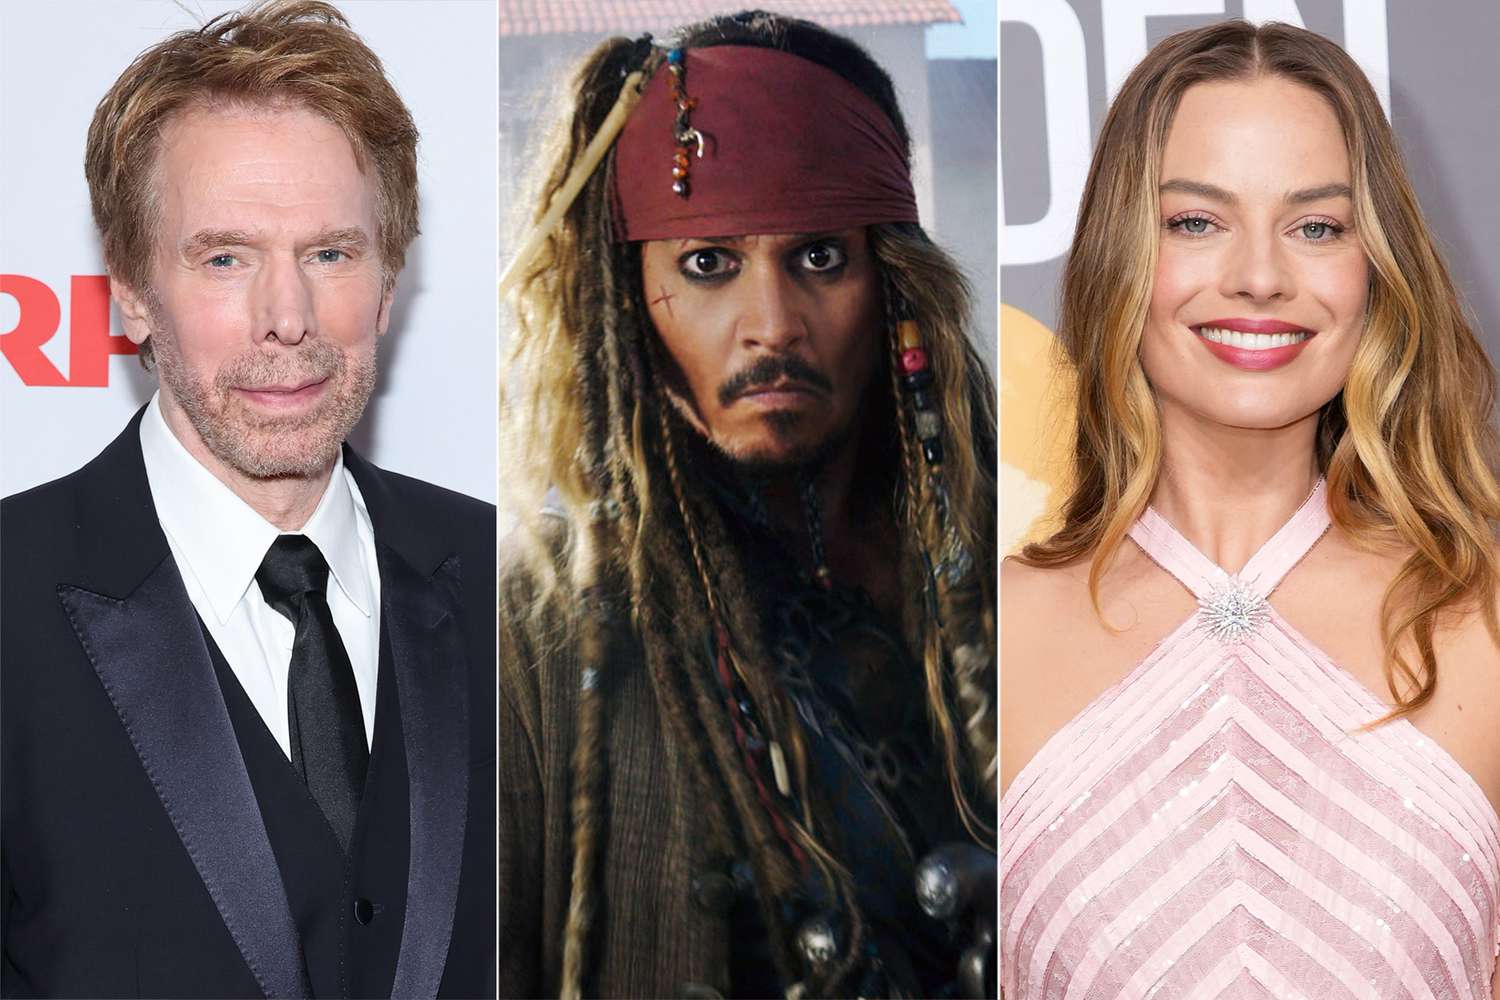 'Pirates of the Caribbean' producer says reboot, Margot Robbie film look promising